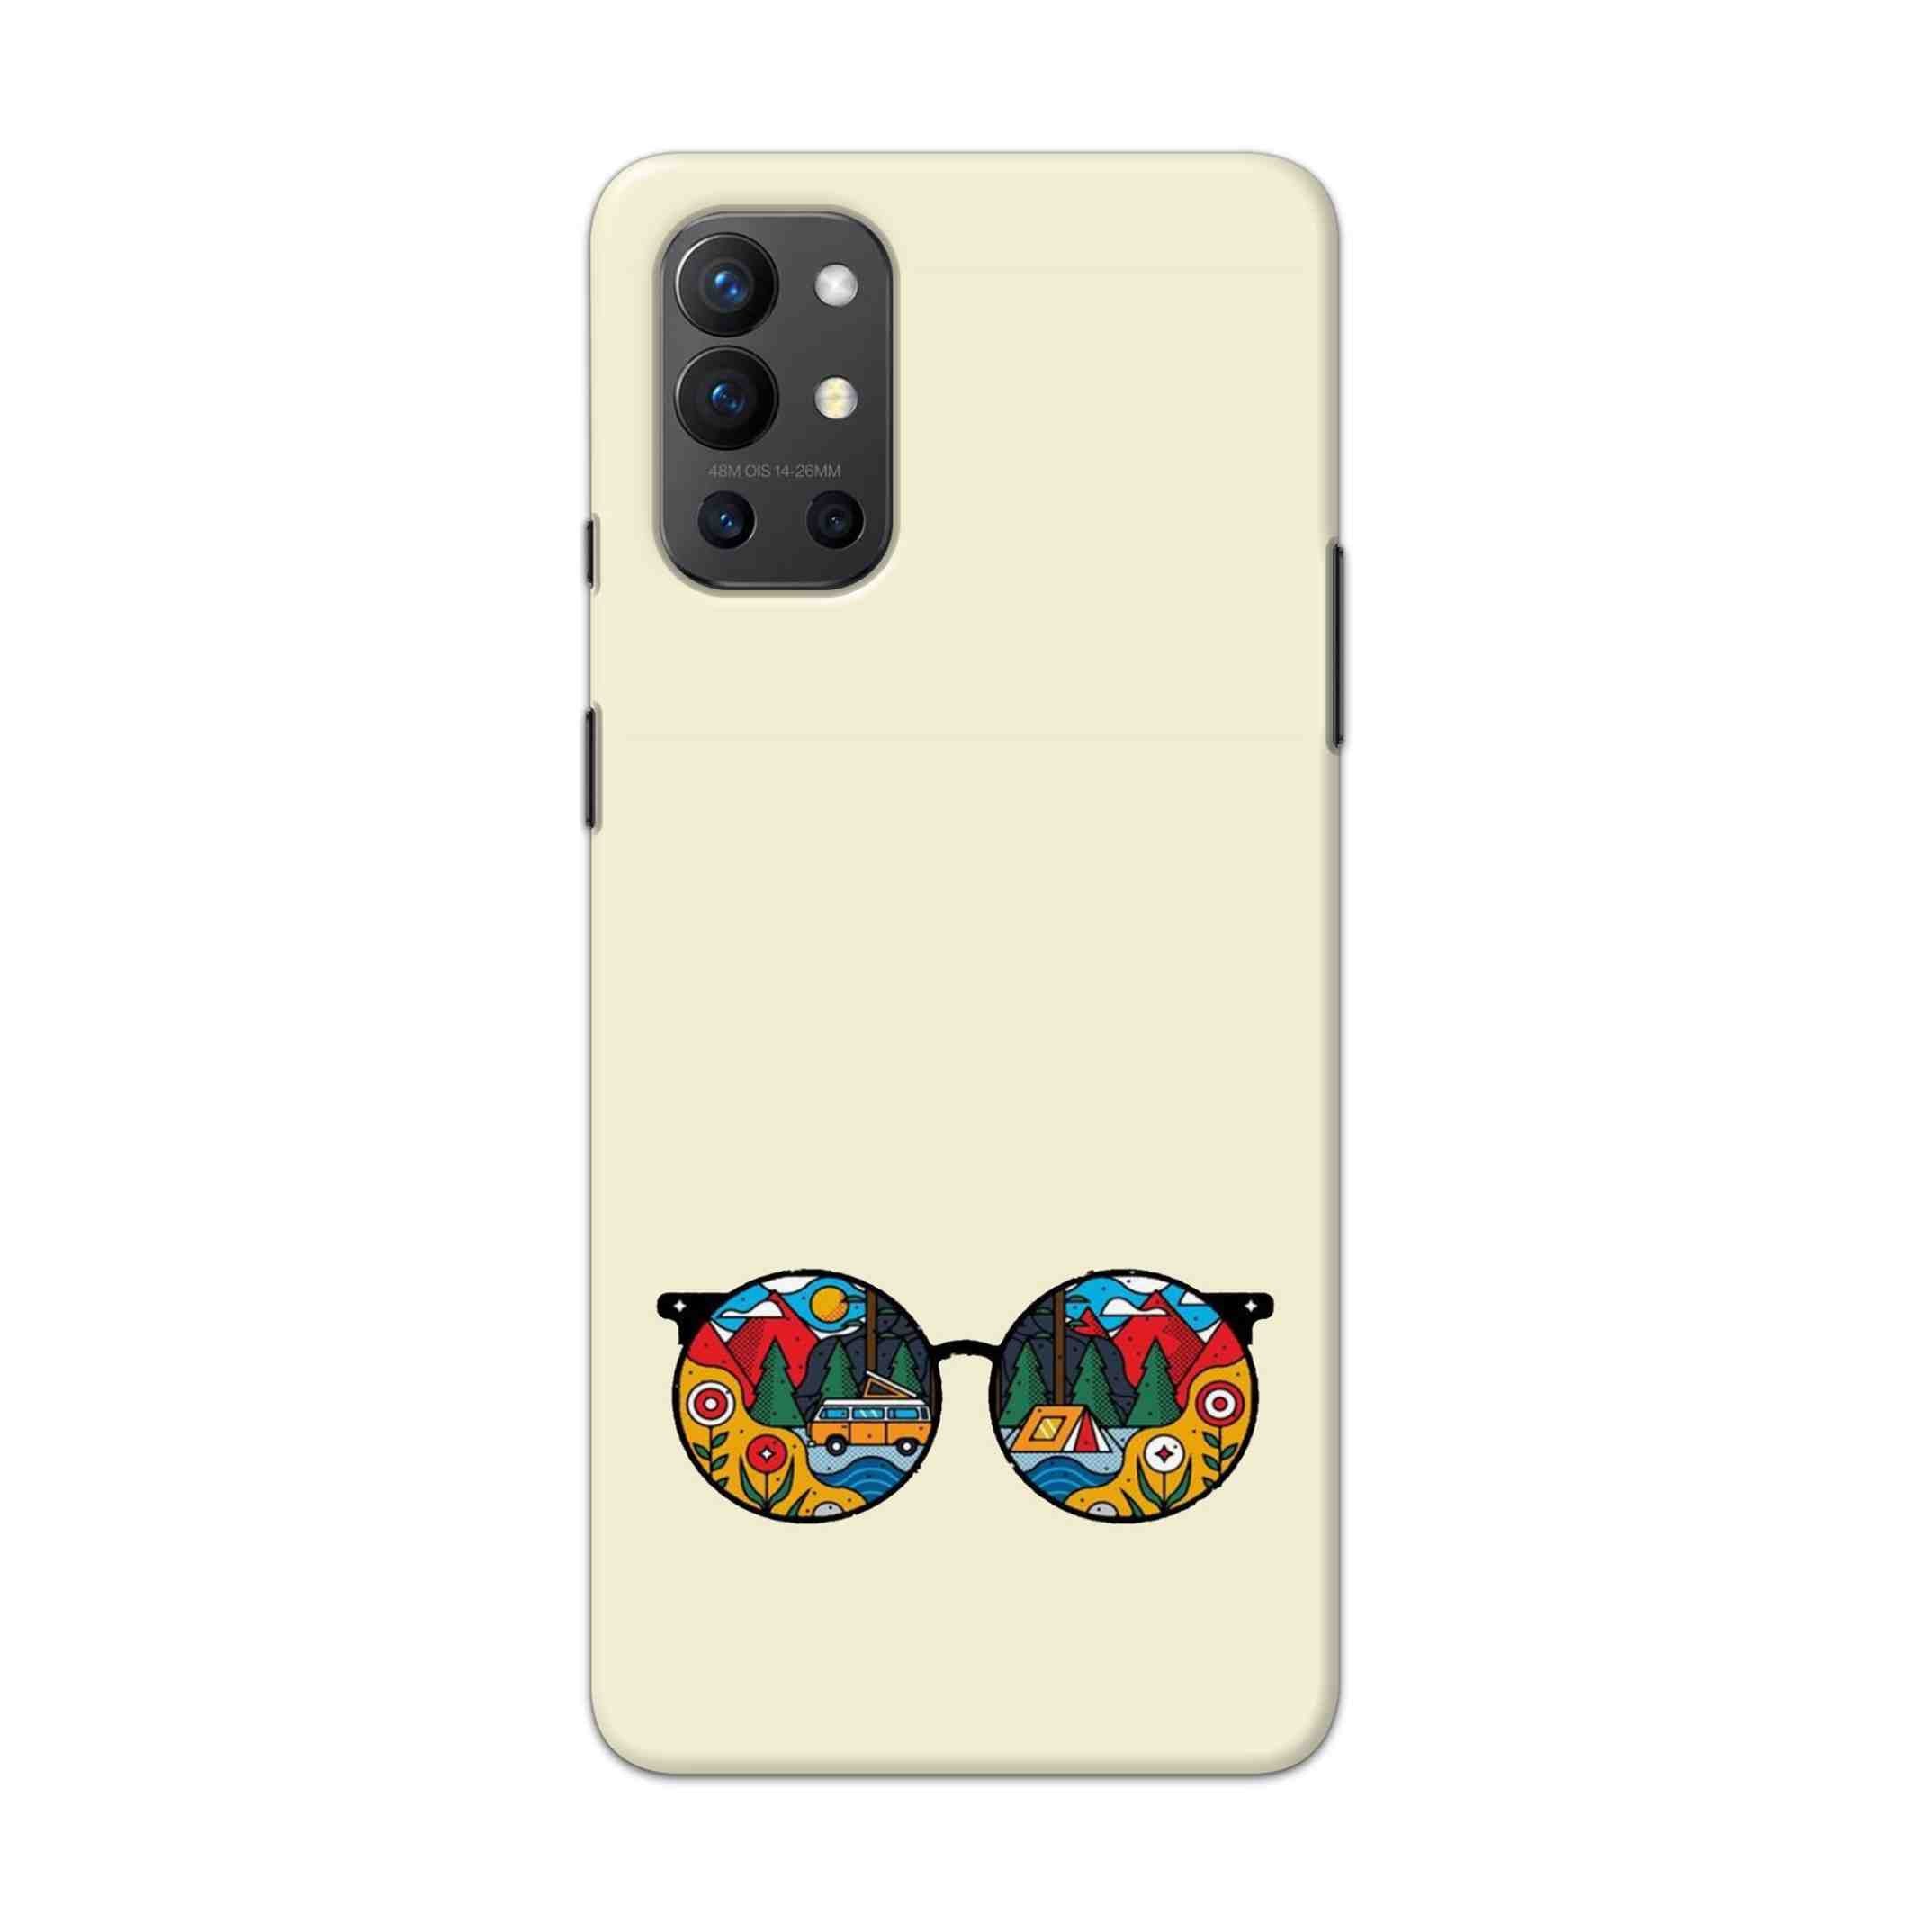 Buy Rainbow Sunglasses Hard Back Mobile Phone Case Cover For OnePlus 9R / 8T Online